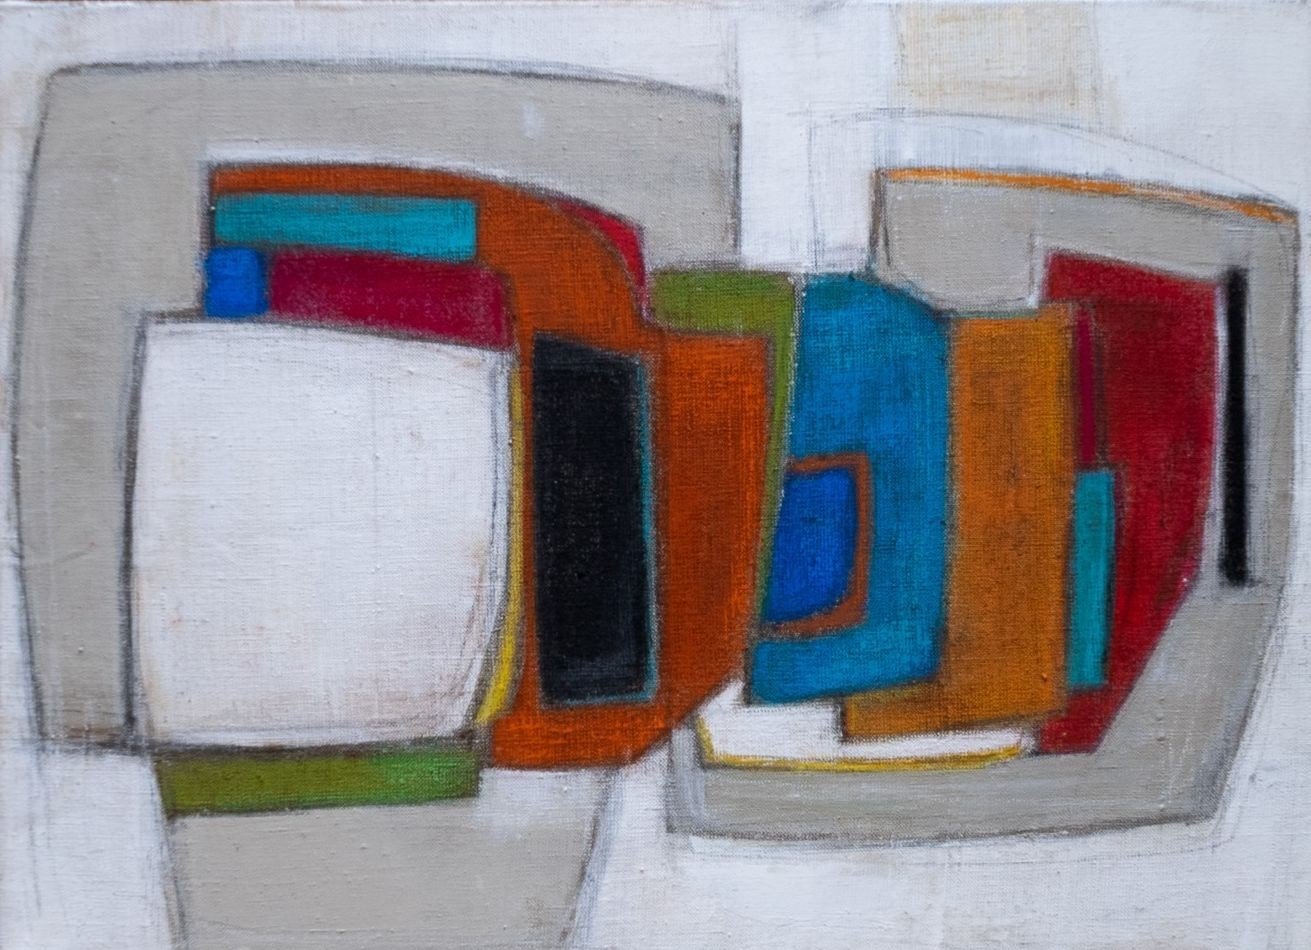 Kippi Leonard's technique involves a unique layering process from multiple perspectives on a flat surface, resulting in minimalist compositions characterized by expressive lines, subtle colors, and varied textures.⁠
⁠
Kippi Leonard⁠
Page 368 (Sears c